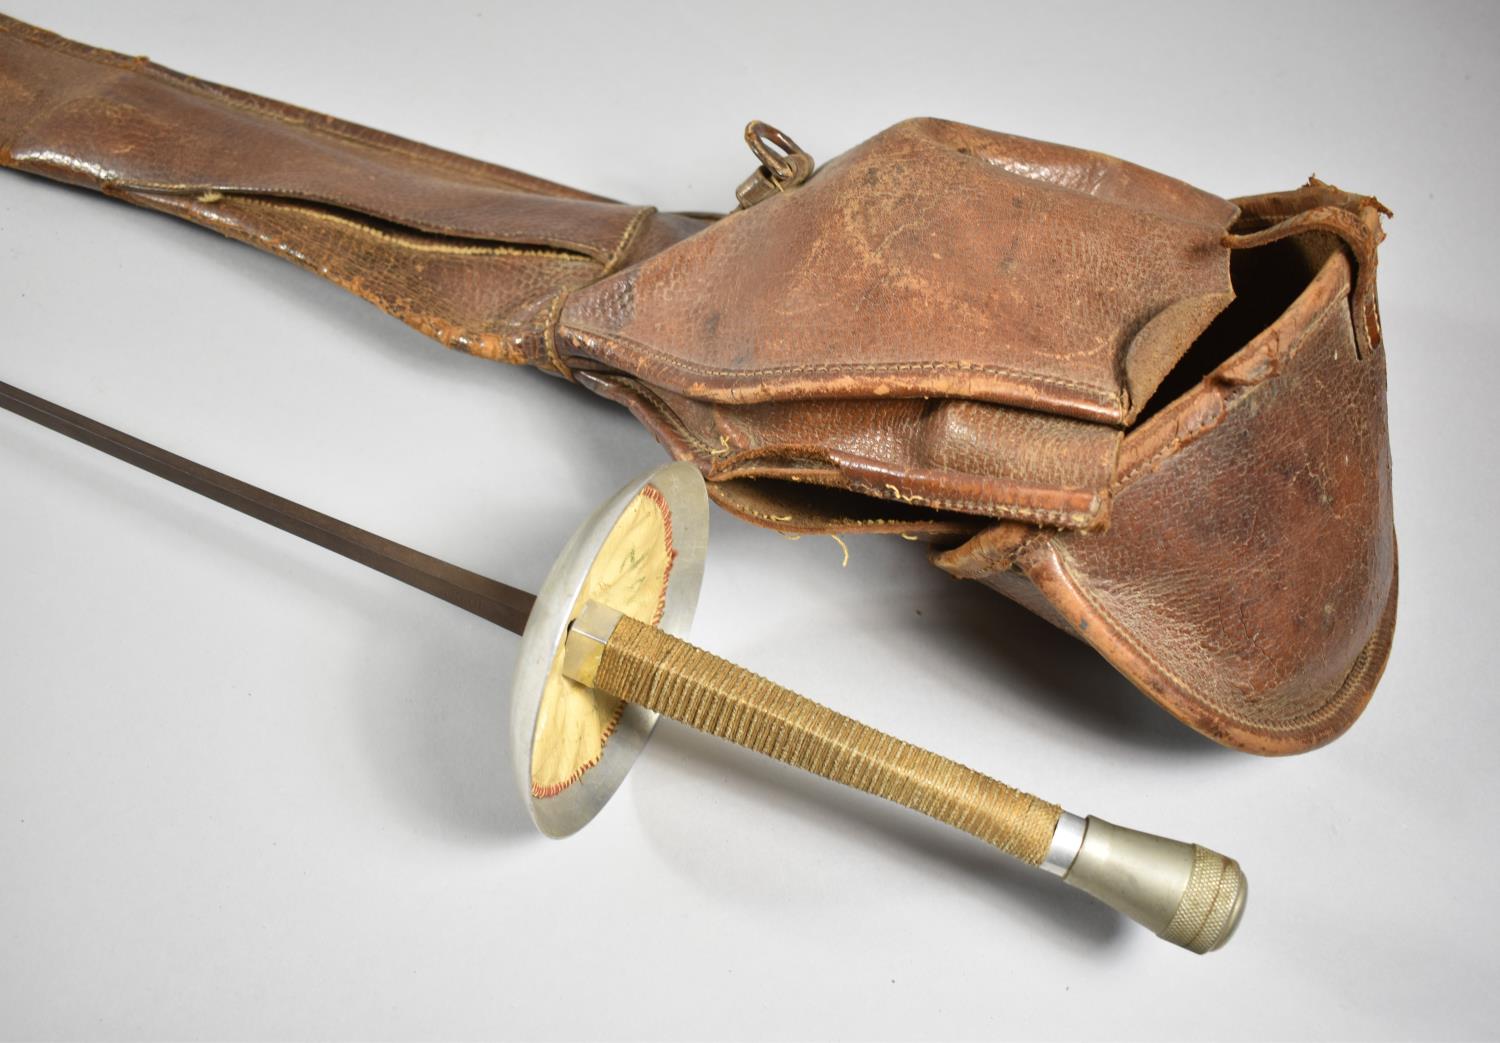 A Early 20th Century Leather Sword Bag Together with an Unrelated Fencing Sword - Image 2 of 2